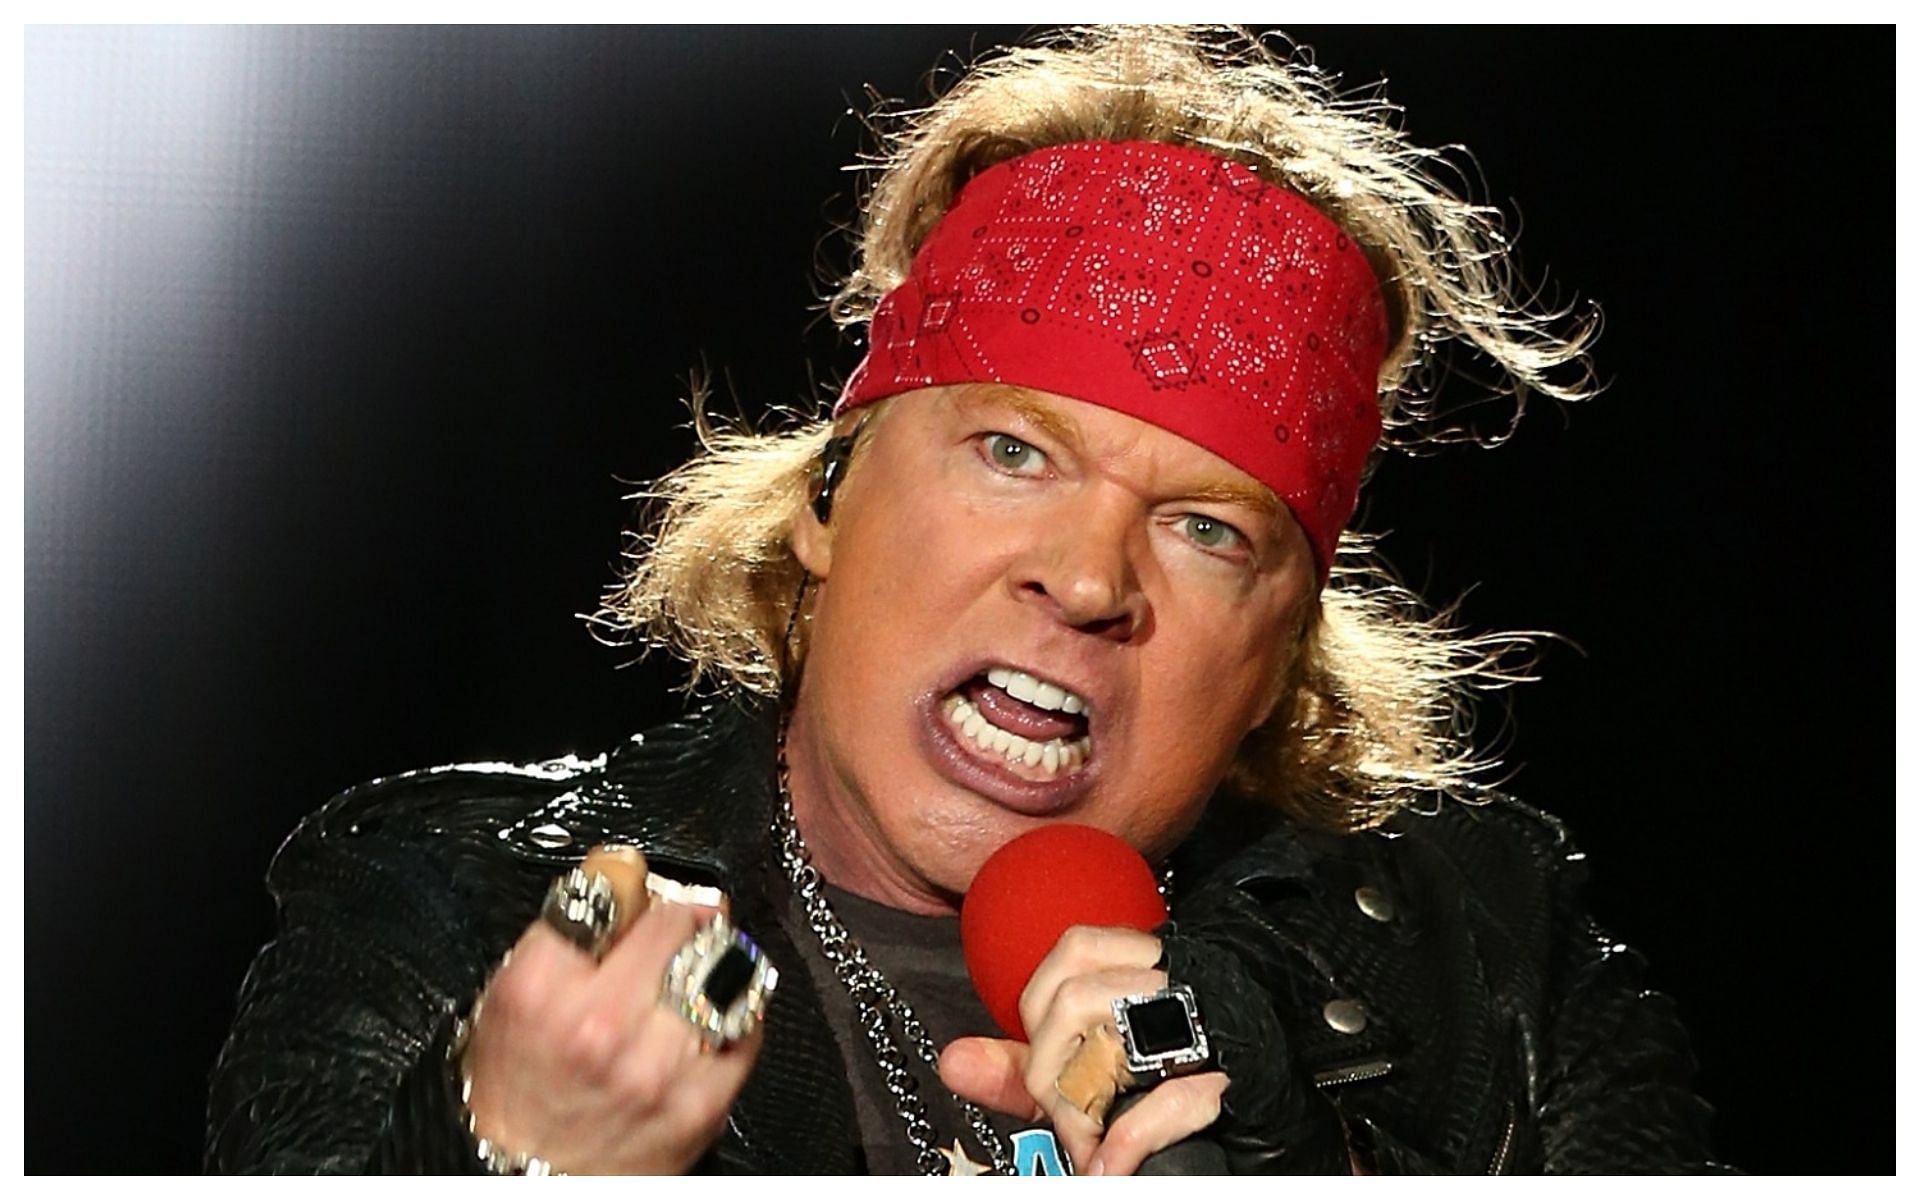 Rock and Roll star Axl Rose turns out for Guns N Roses (Image via Daily Mail)